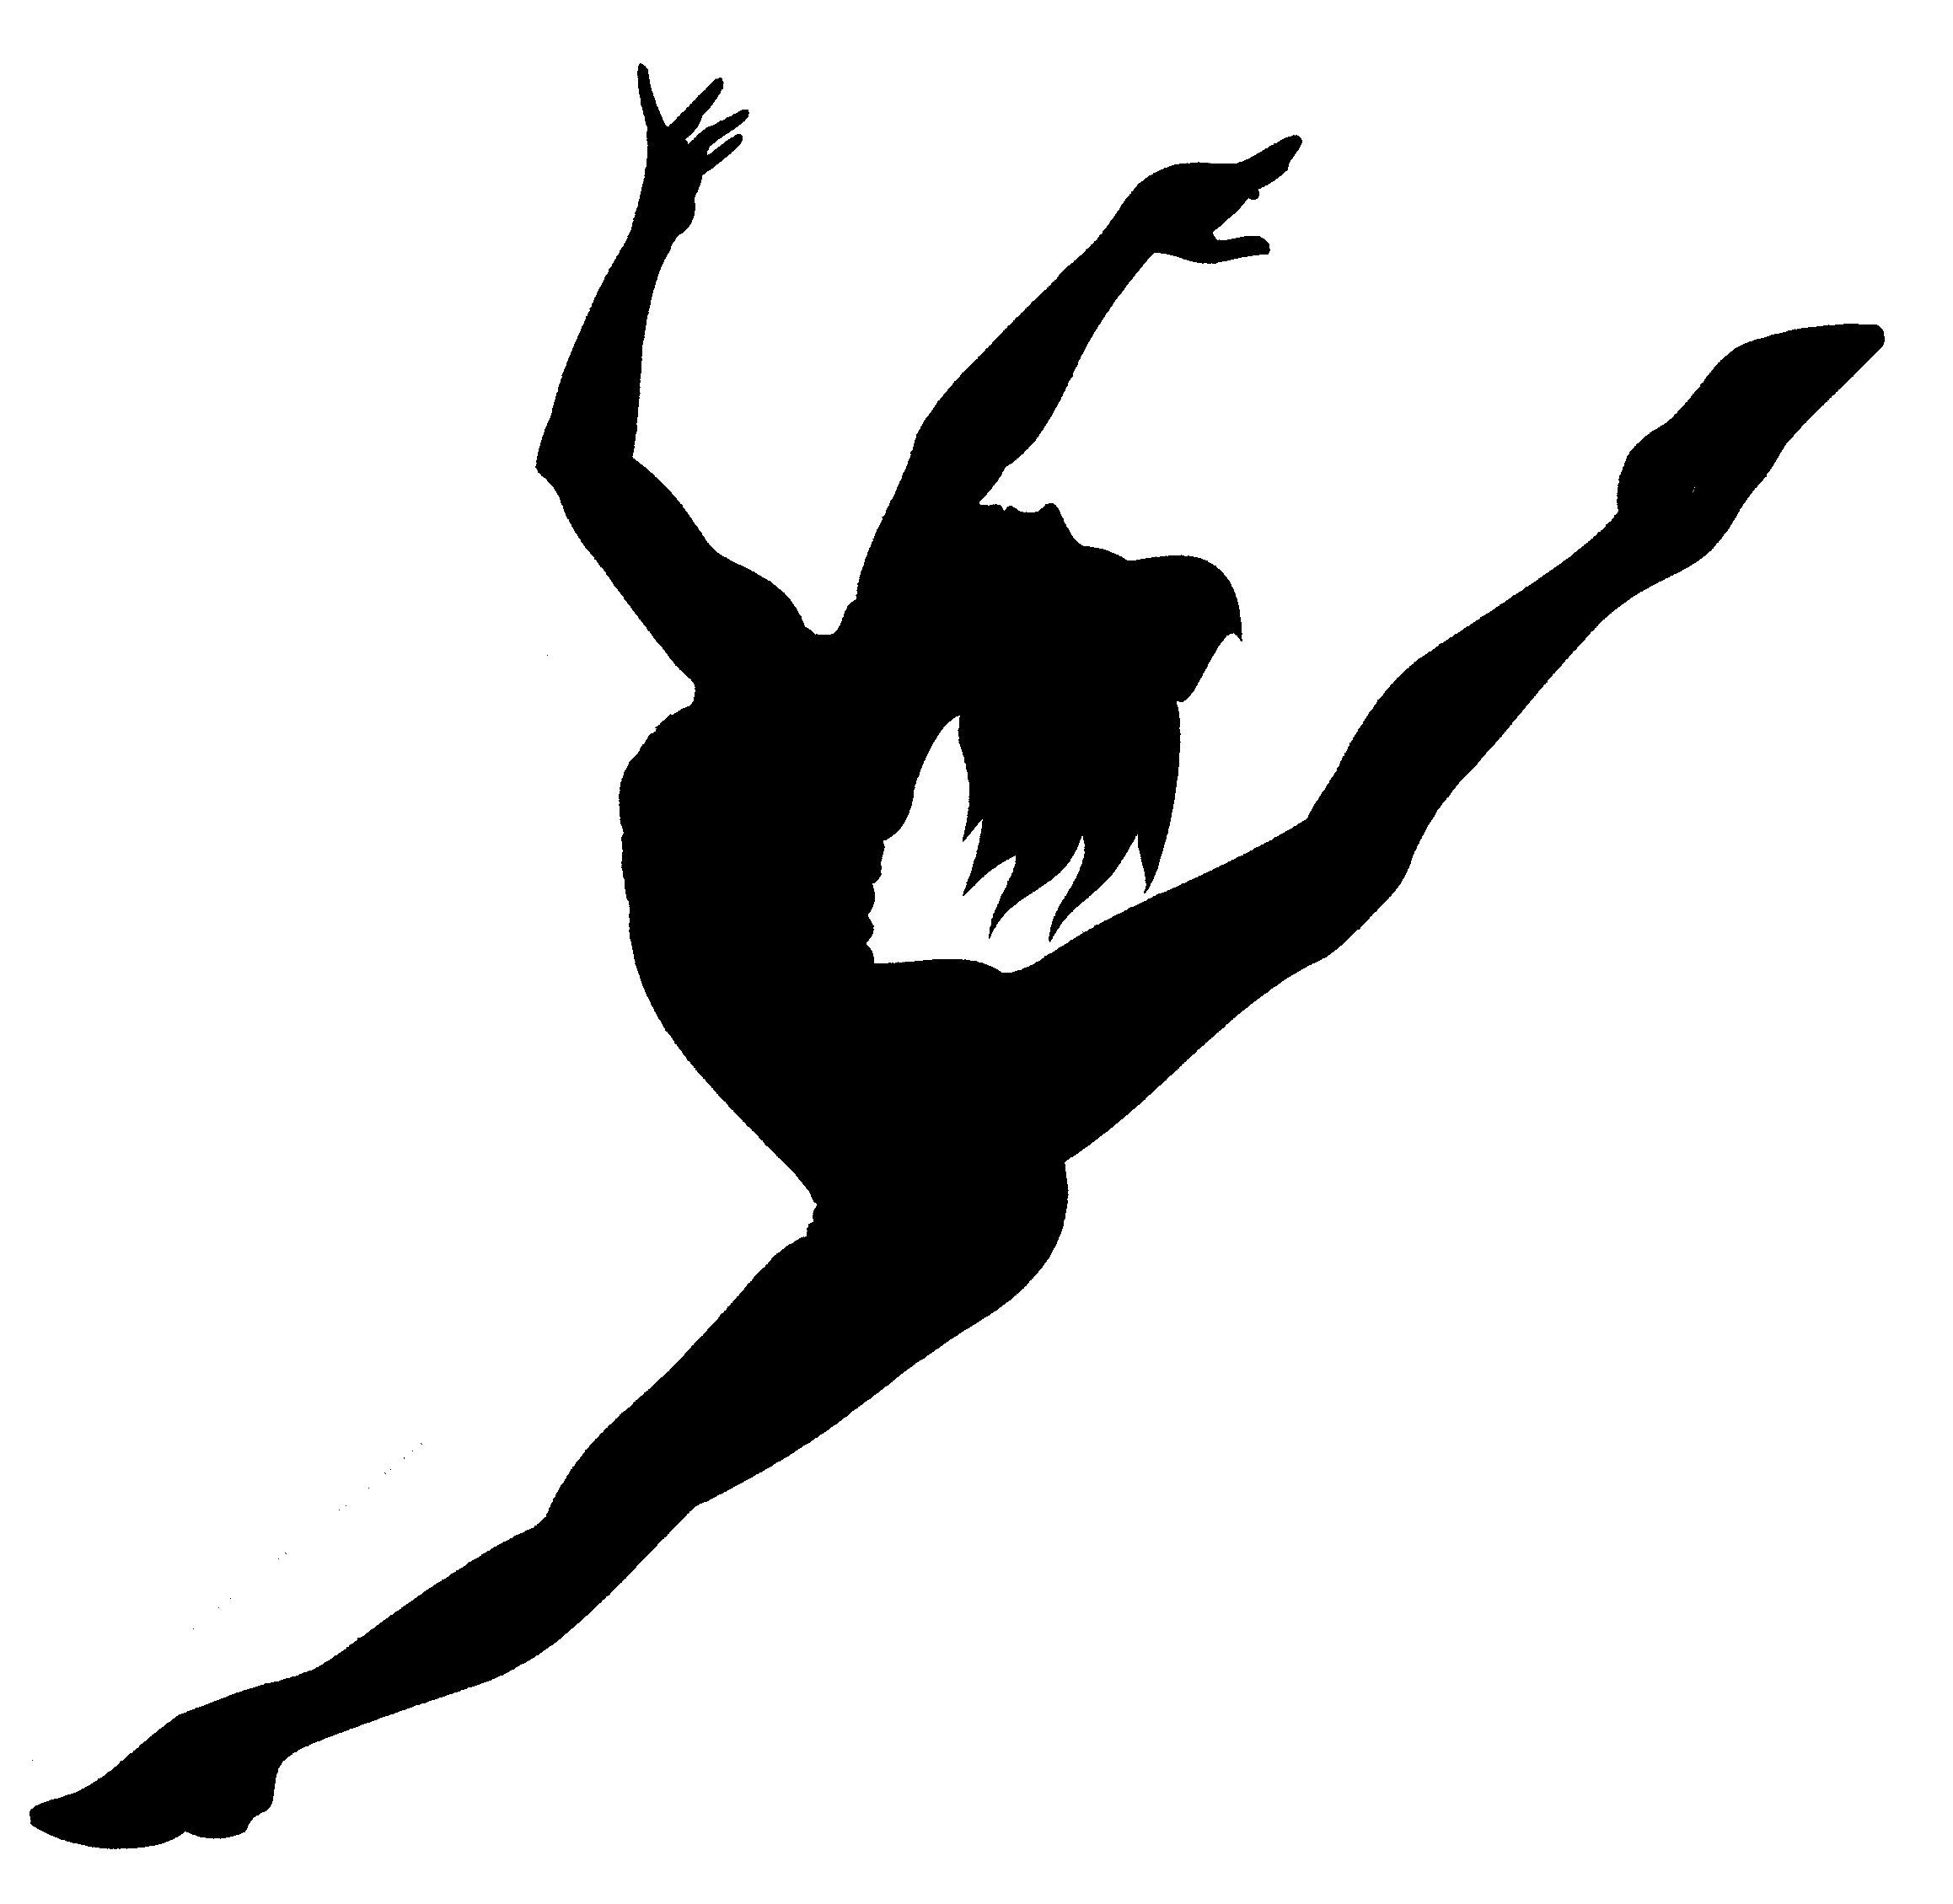 Dancer silhouette scorpion | Clipart library - Free Clipart Images